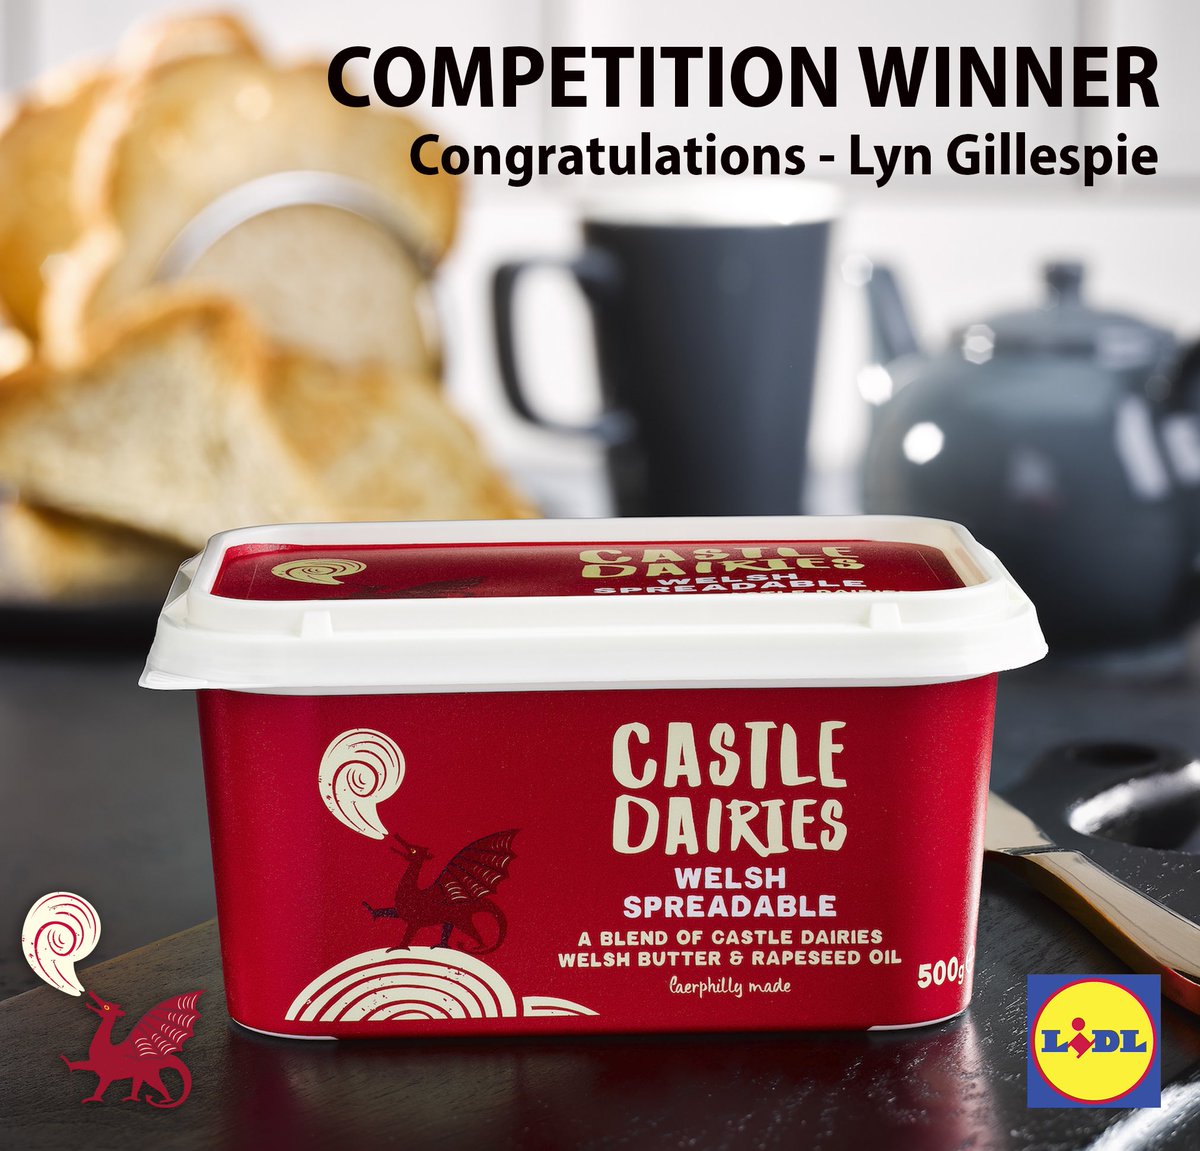 🤩CONGRATULATIONS - Lyn Gillespie Winner of our @lidlgb North competition. Please DM us your address & we’ll pop a butter pack in the post to you shortly. Many thanks to everyone who entered. Please stay tuned for our next GIVEAWAY coming soon… #castledairies #dairy #winner